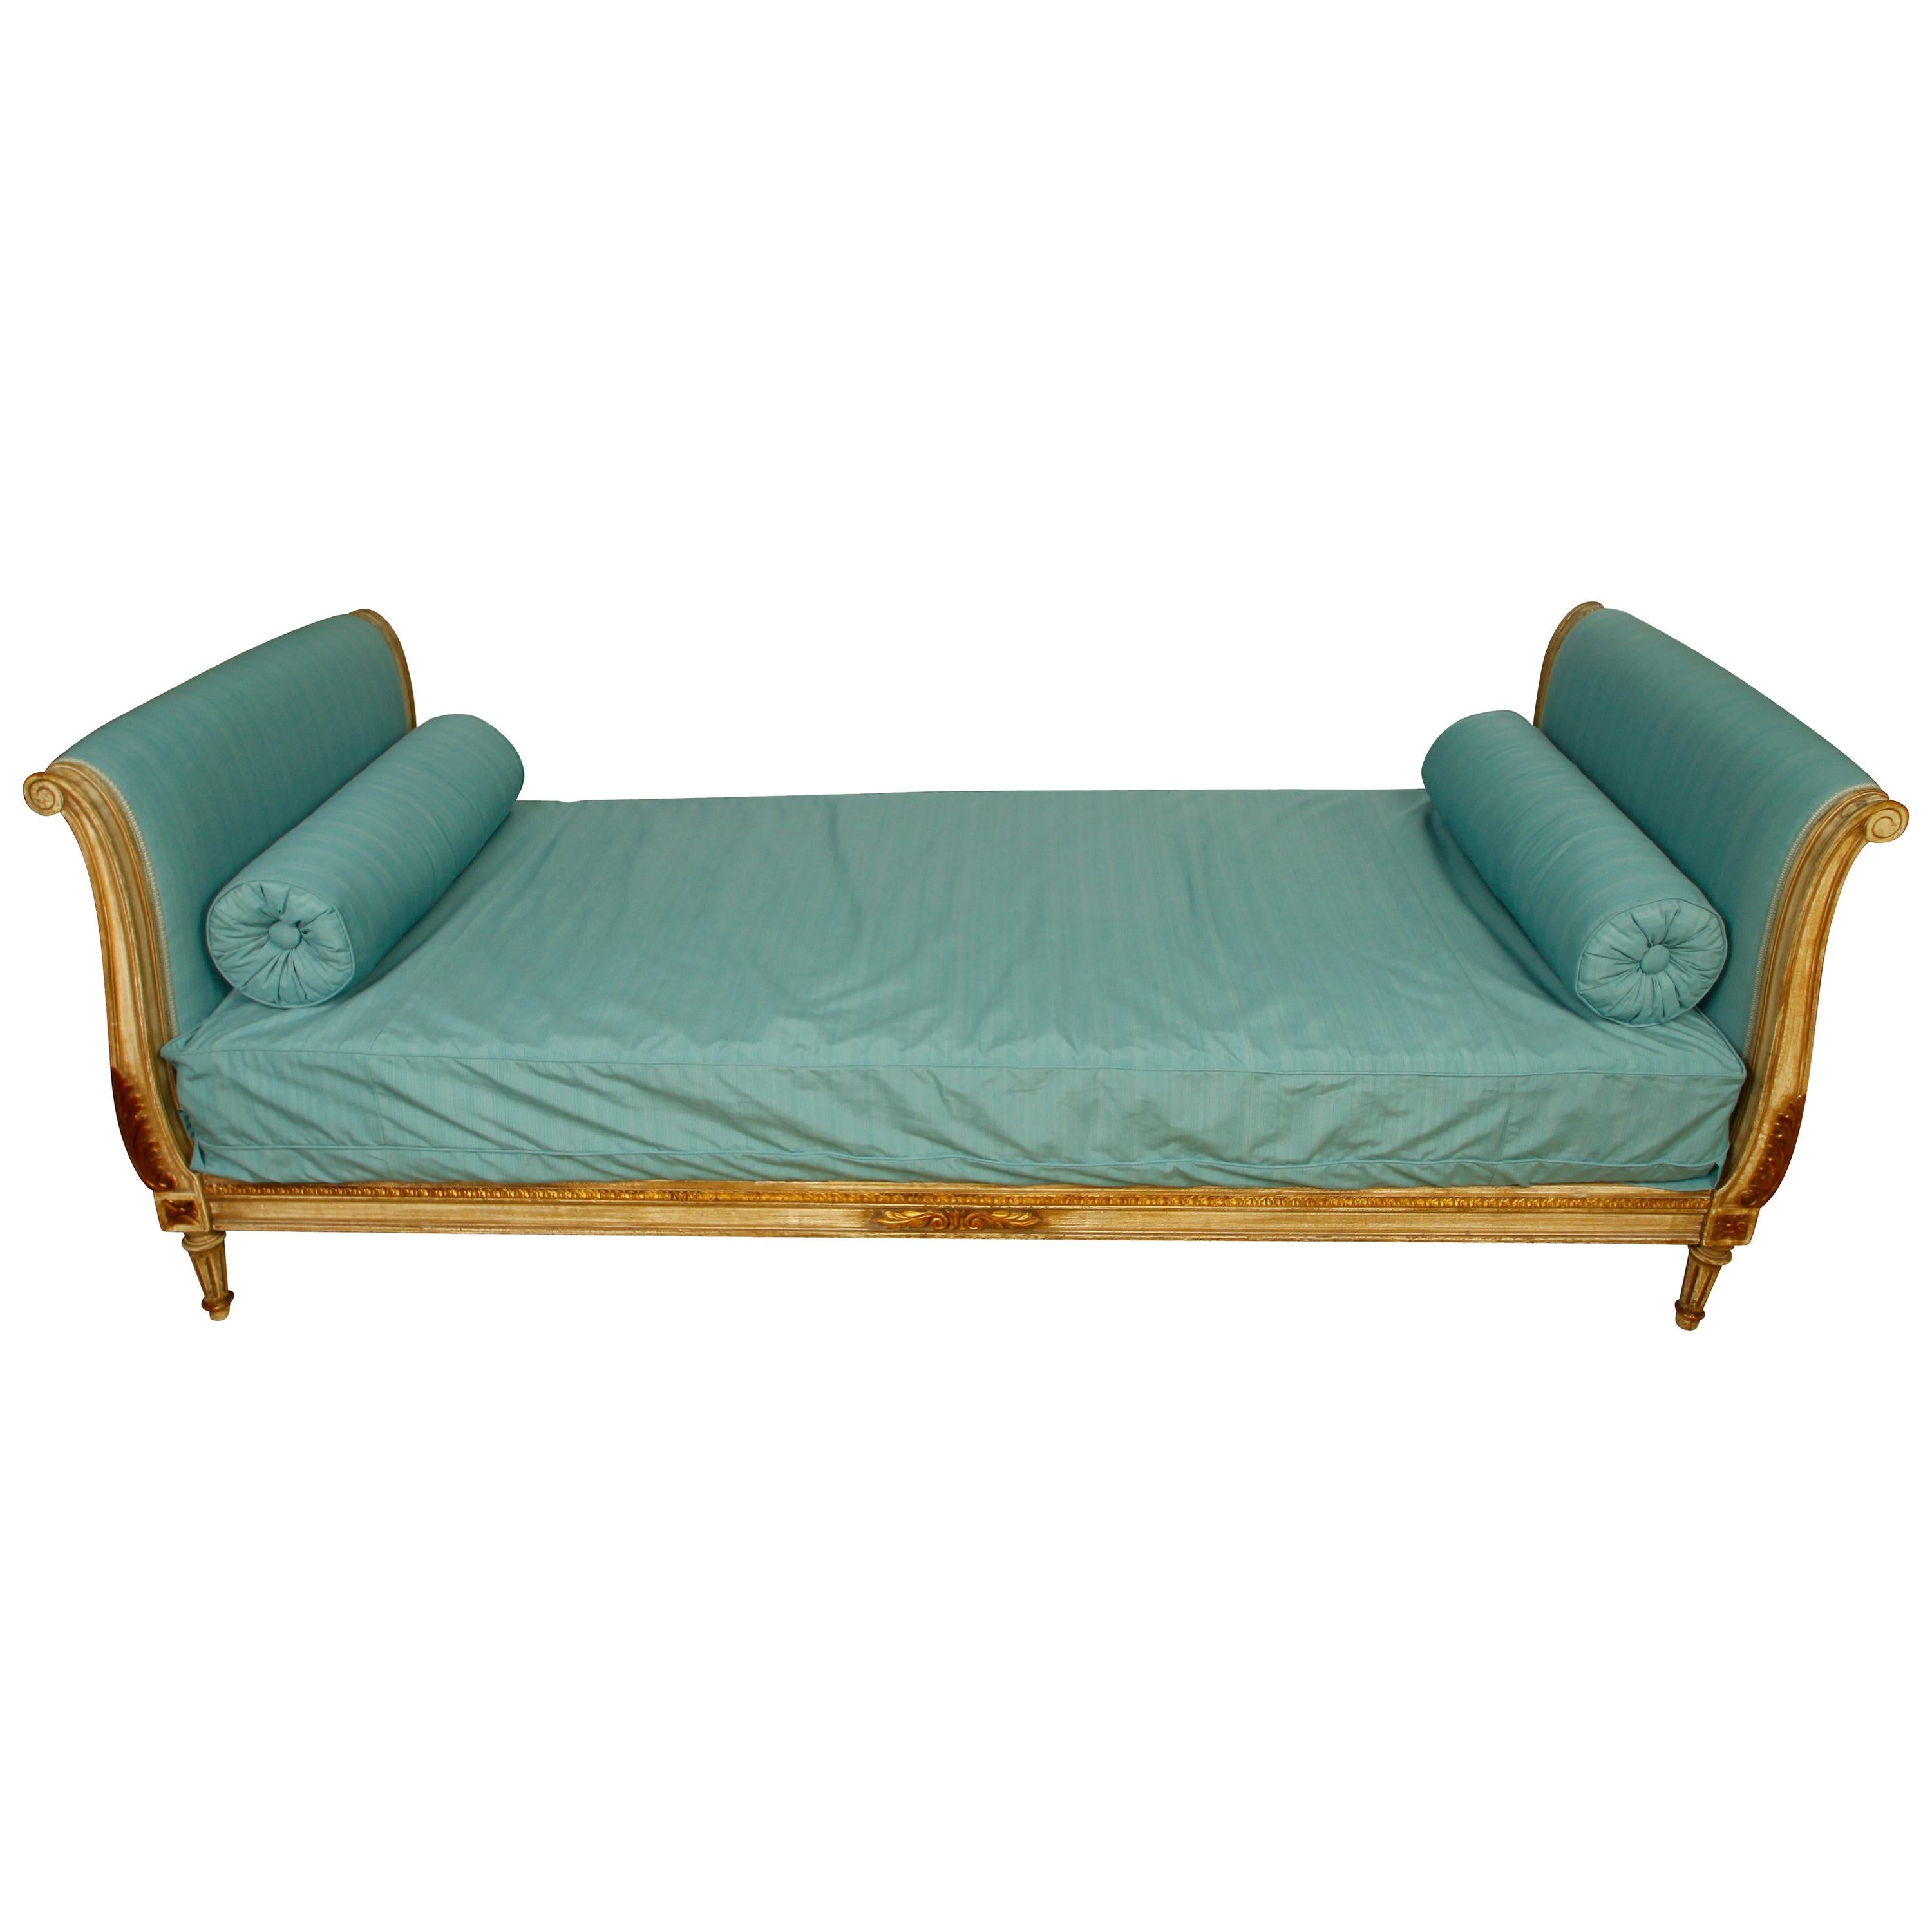 Newly Reupholstered Antique French Daybed